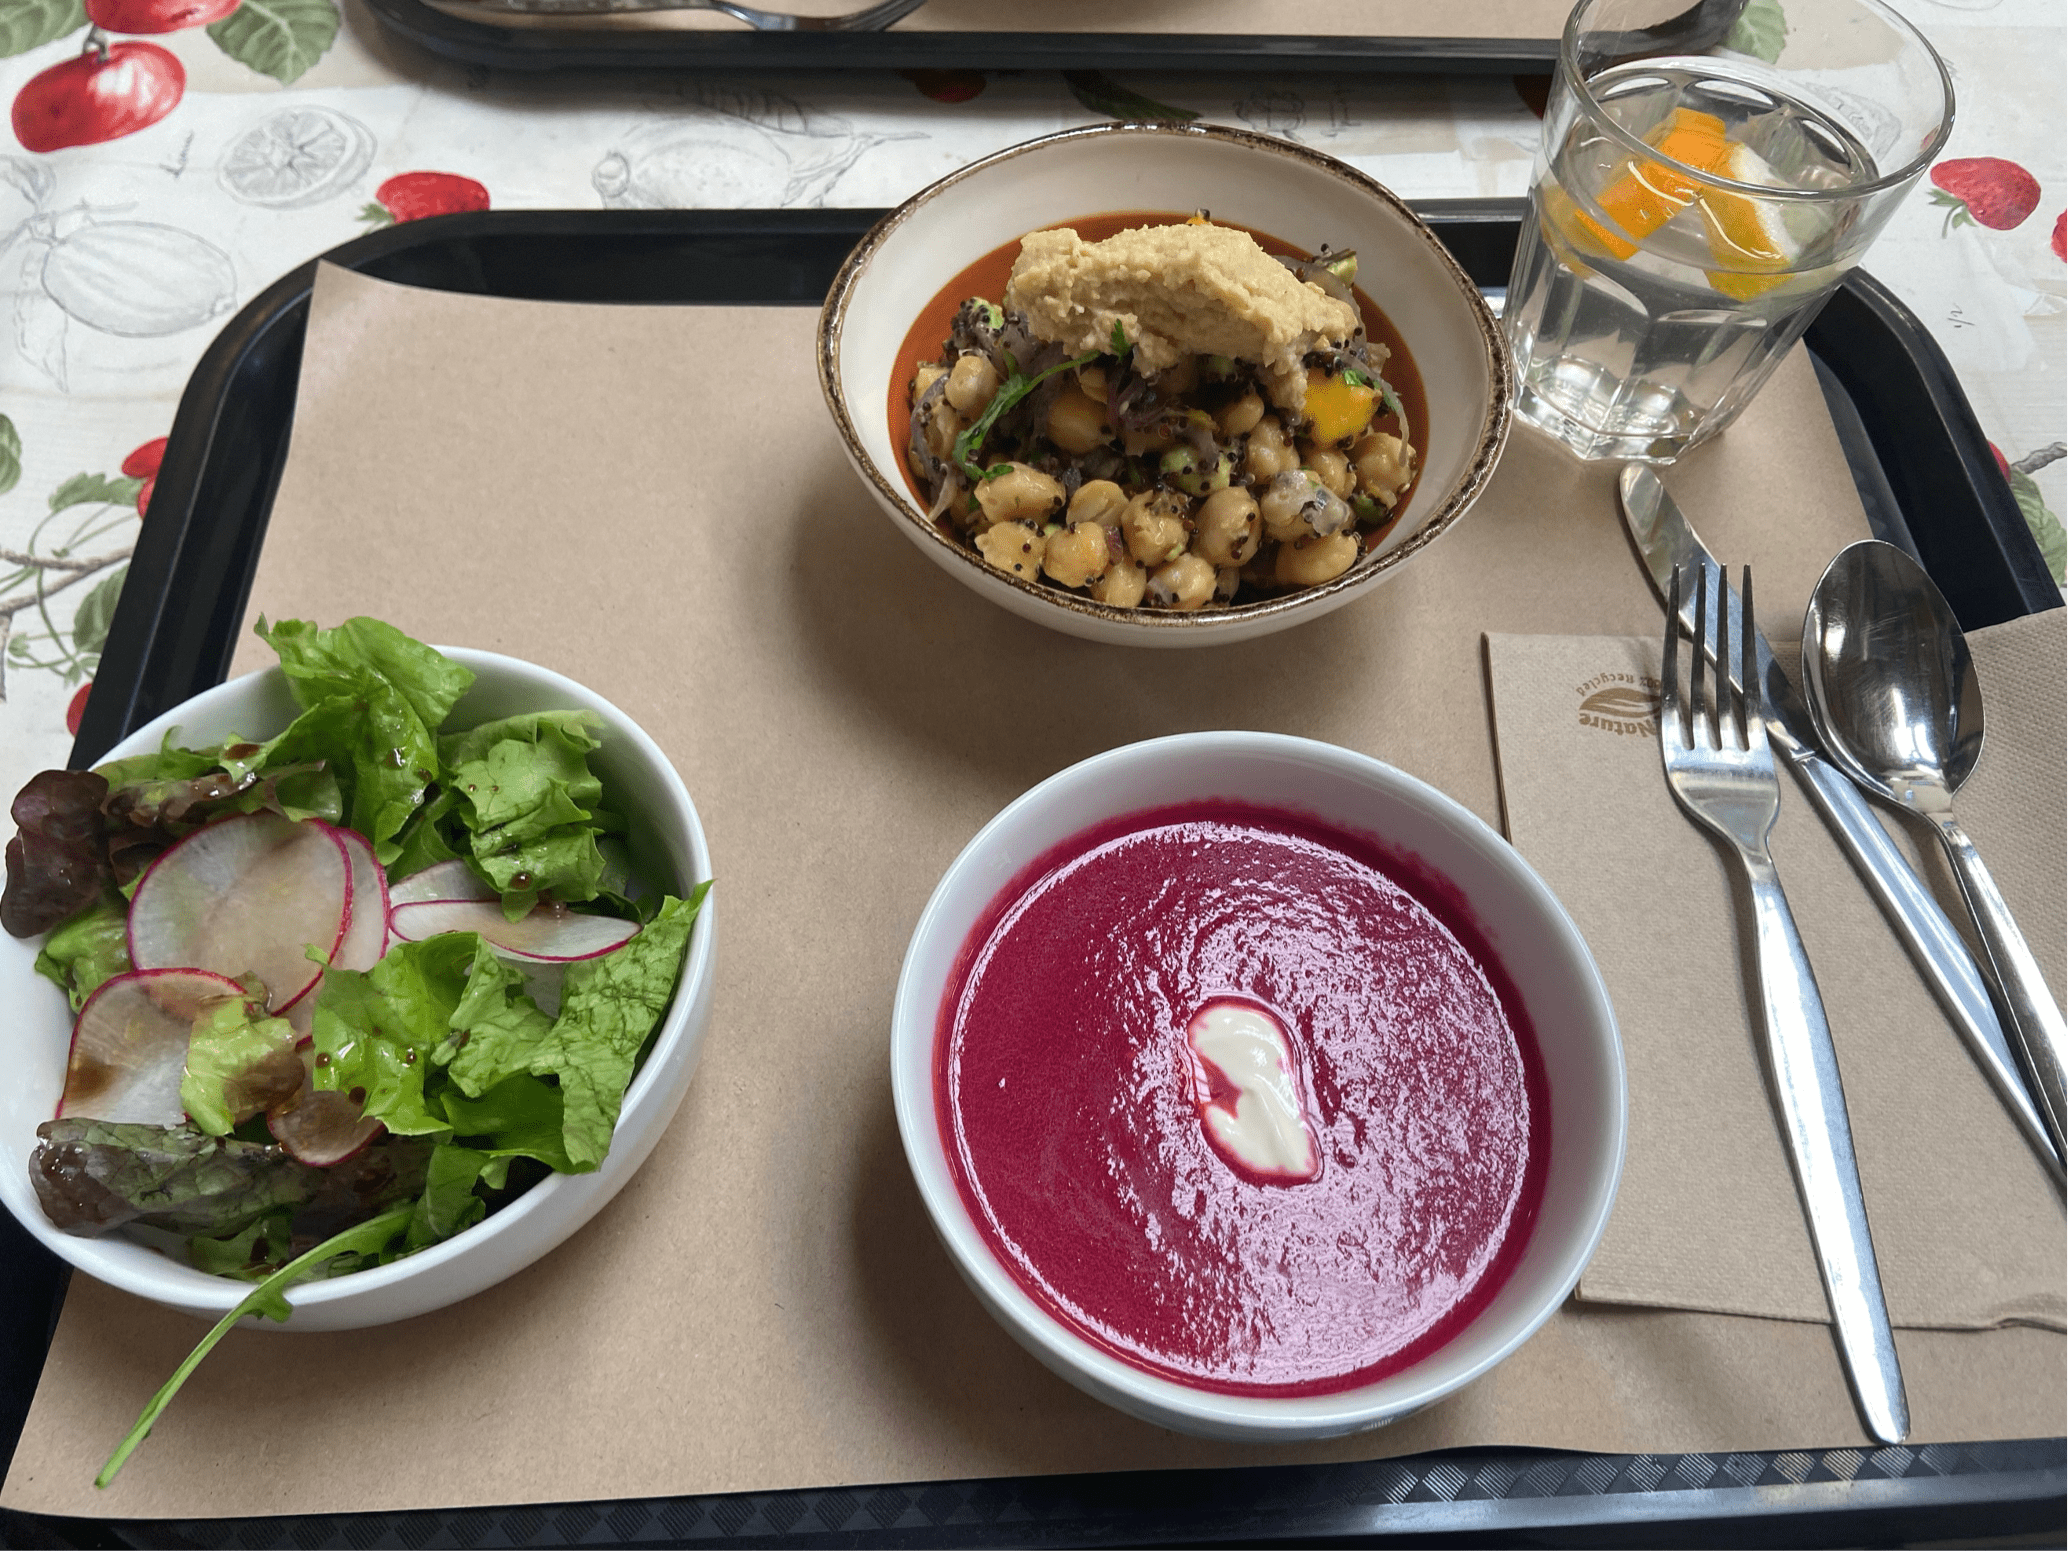 A salad, soup and chickpea dish